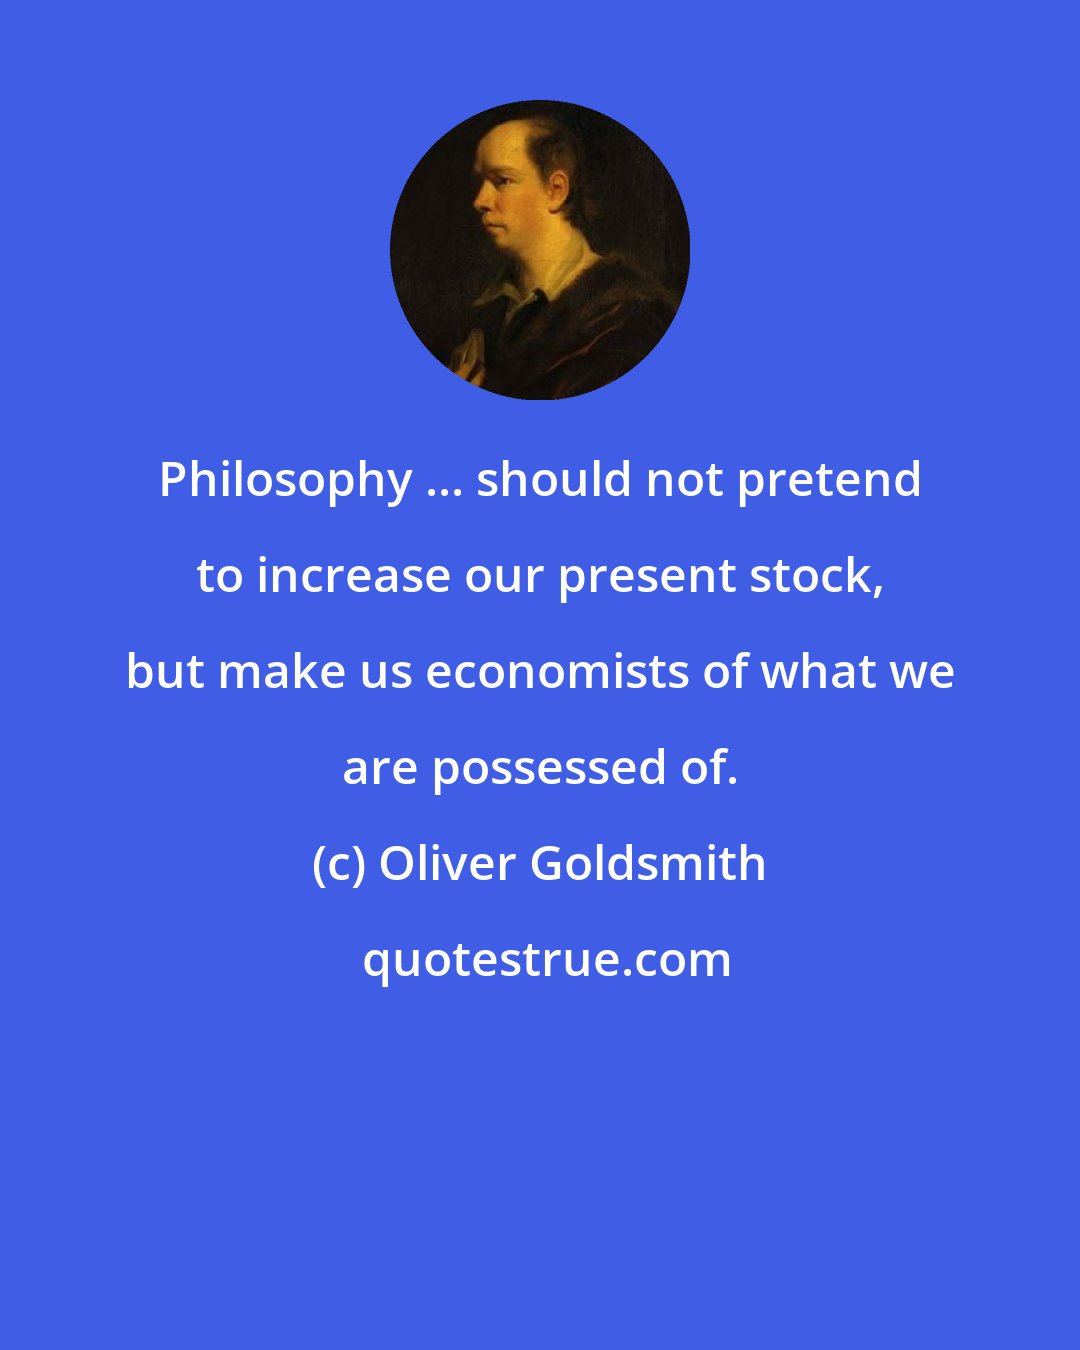 Oliver Goldsmith: Philosophy ... should not pretend to increase our present stock, but make us economists of what we are possessed of.